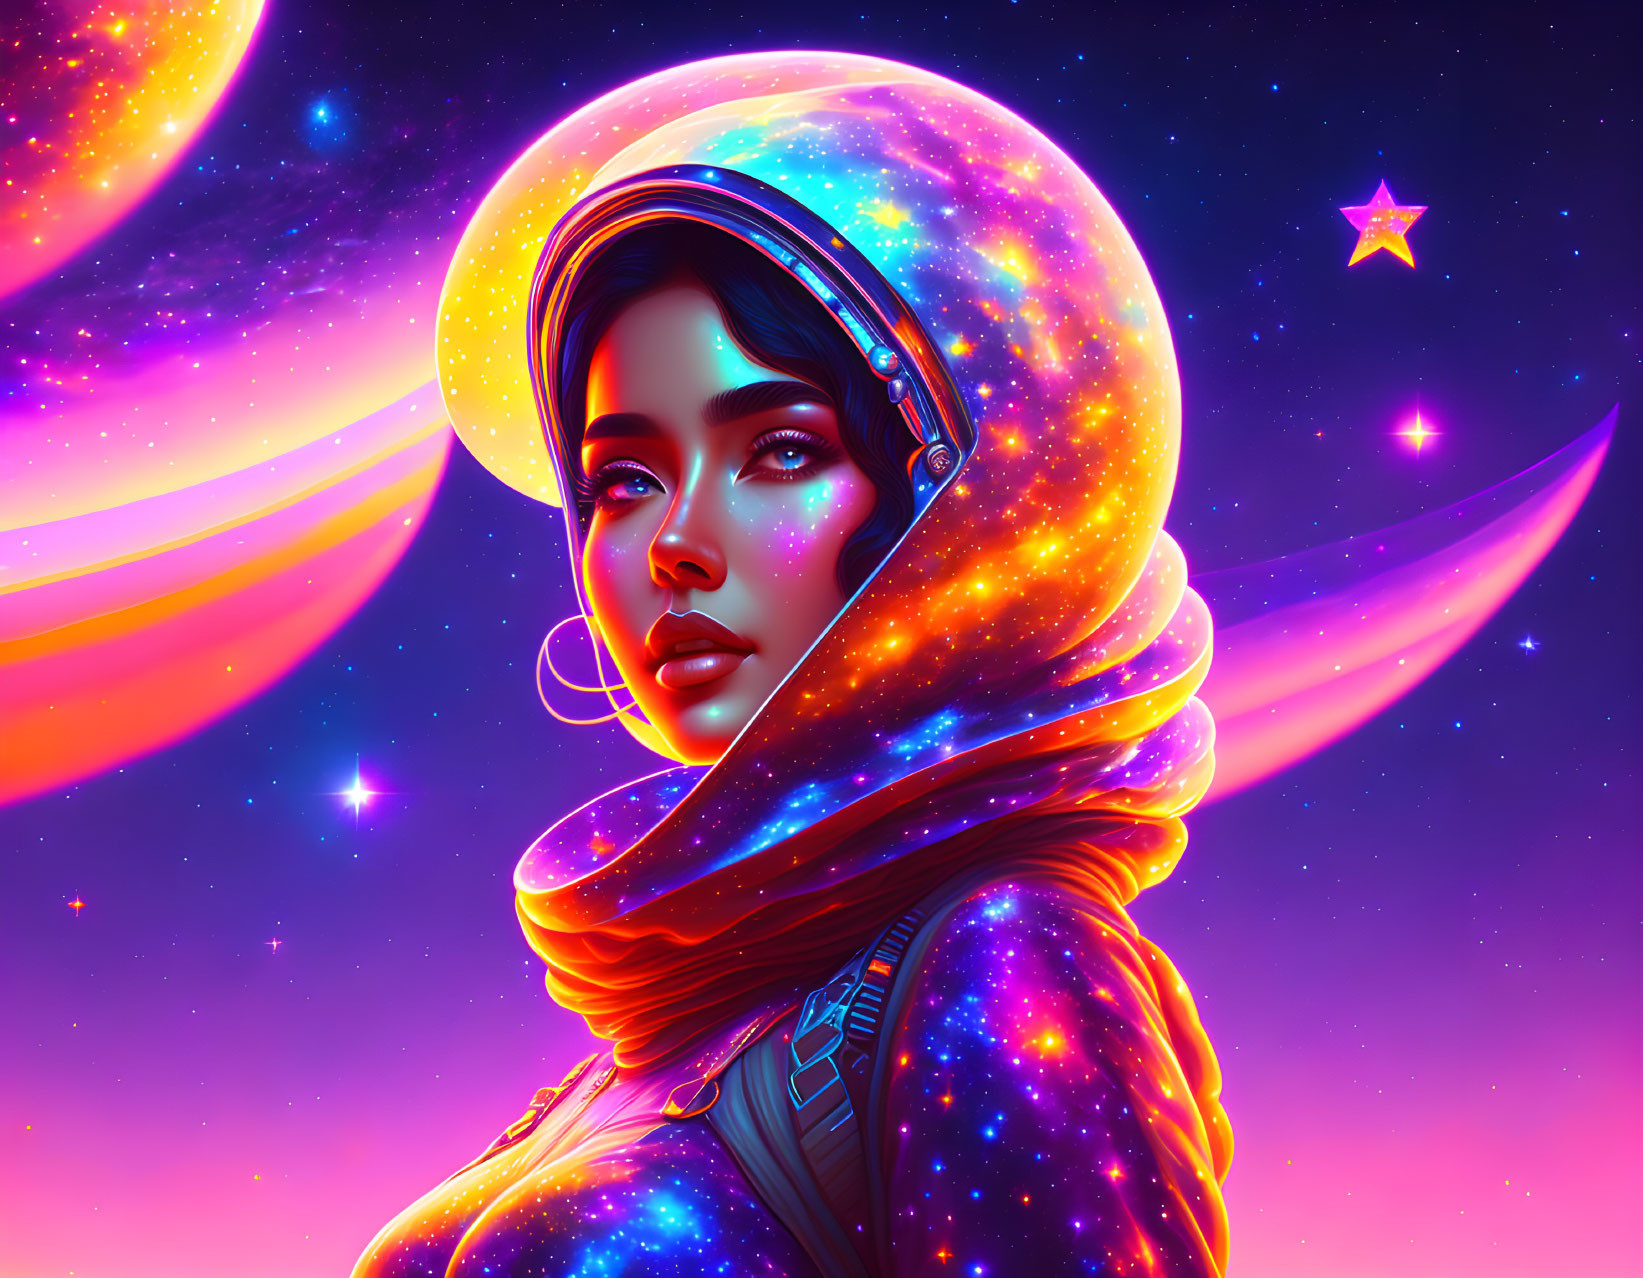 Cosmic-themed digital artwork of woman in hijab and spacesuit